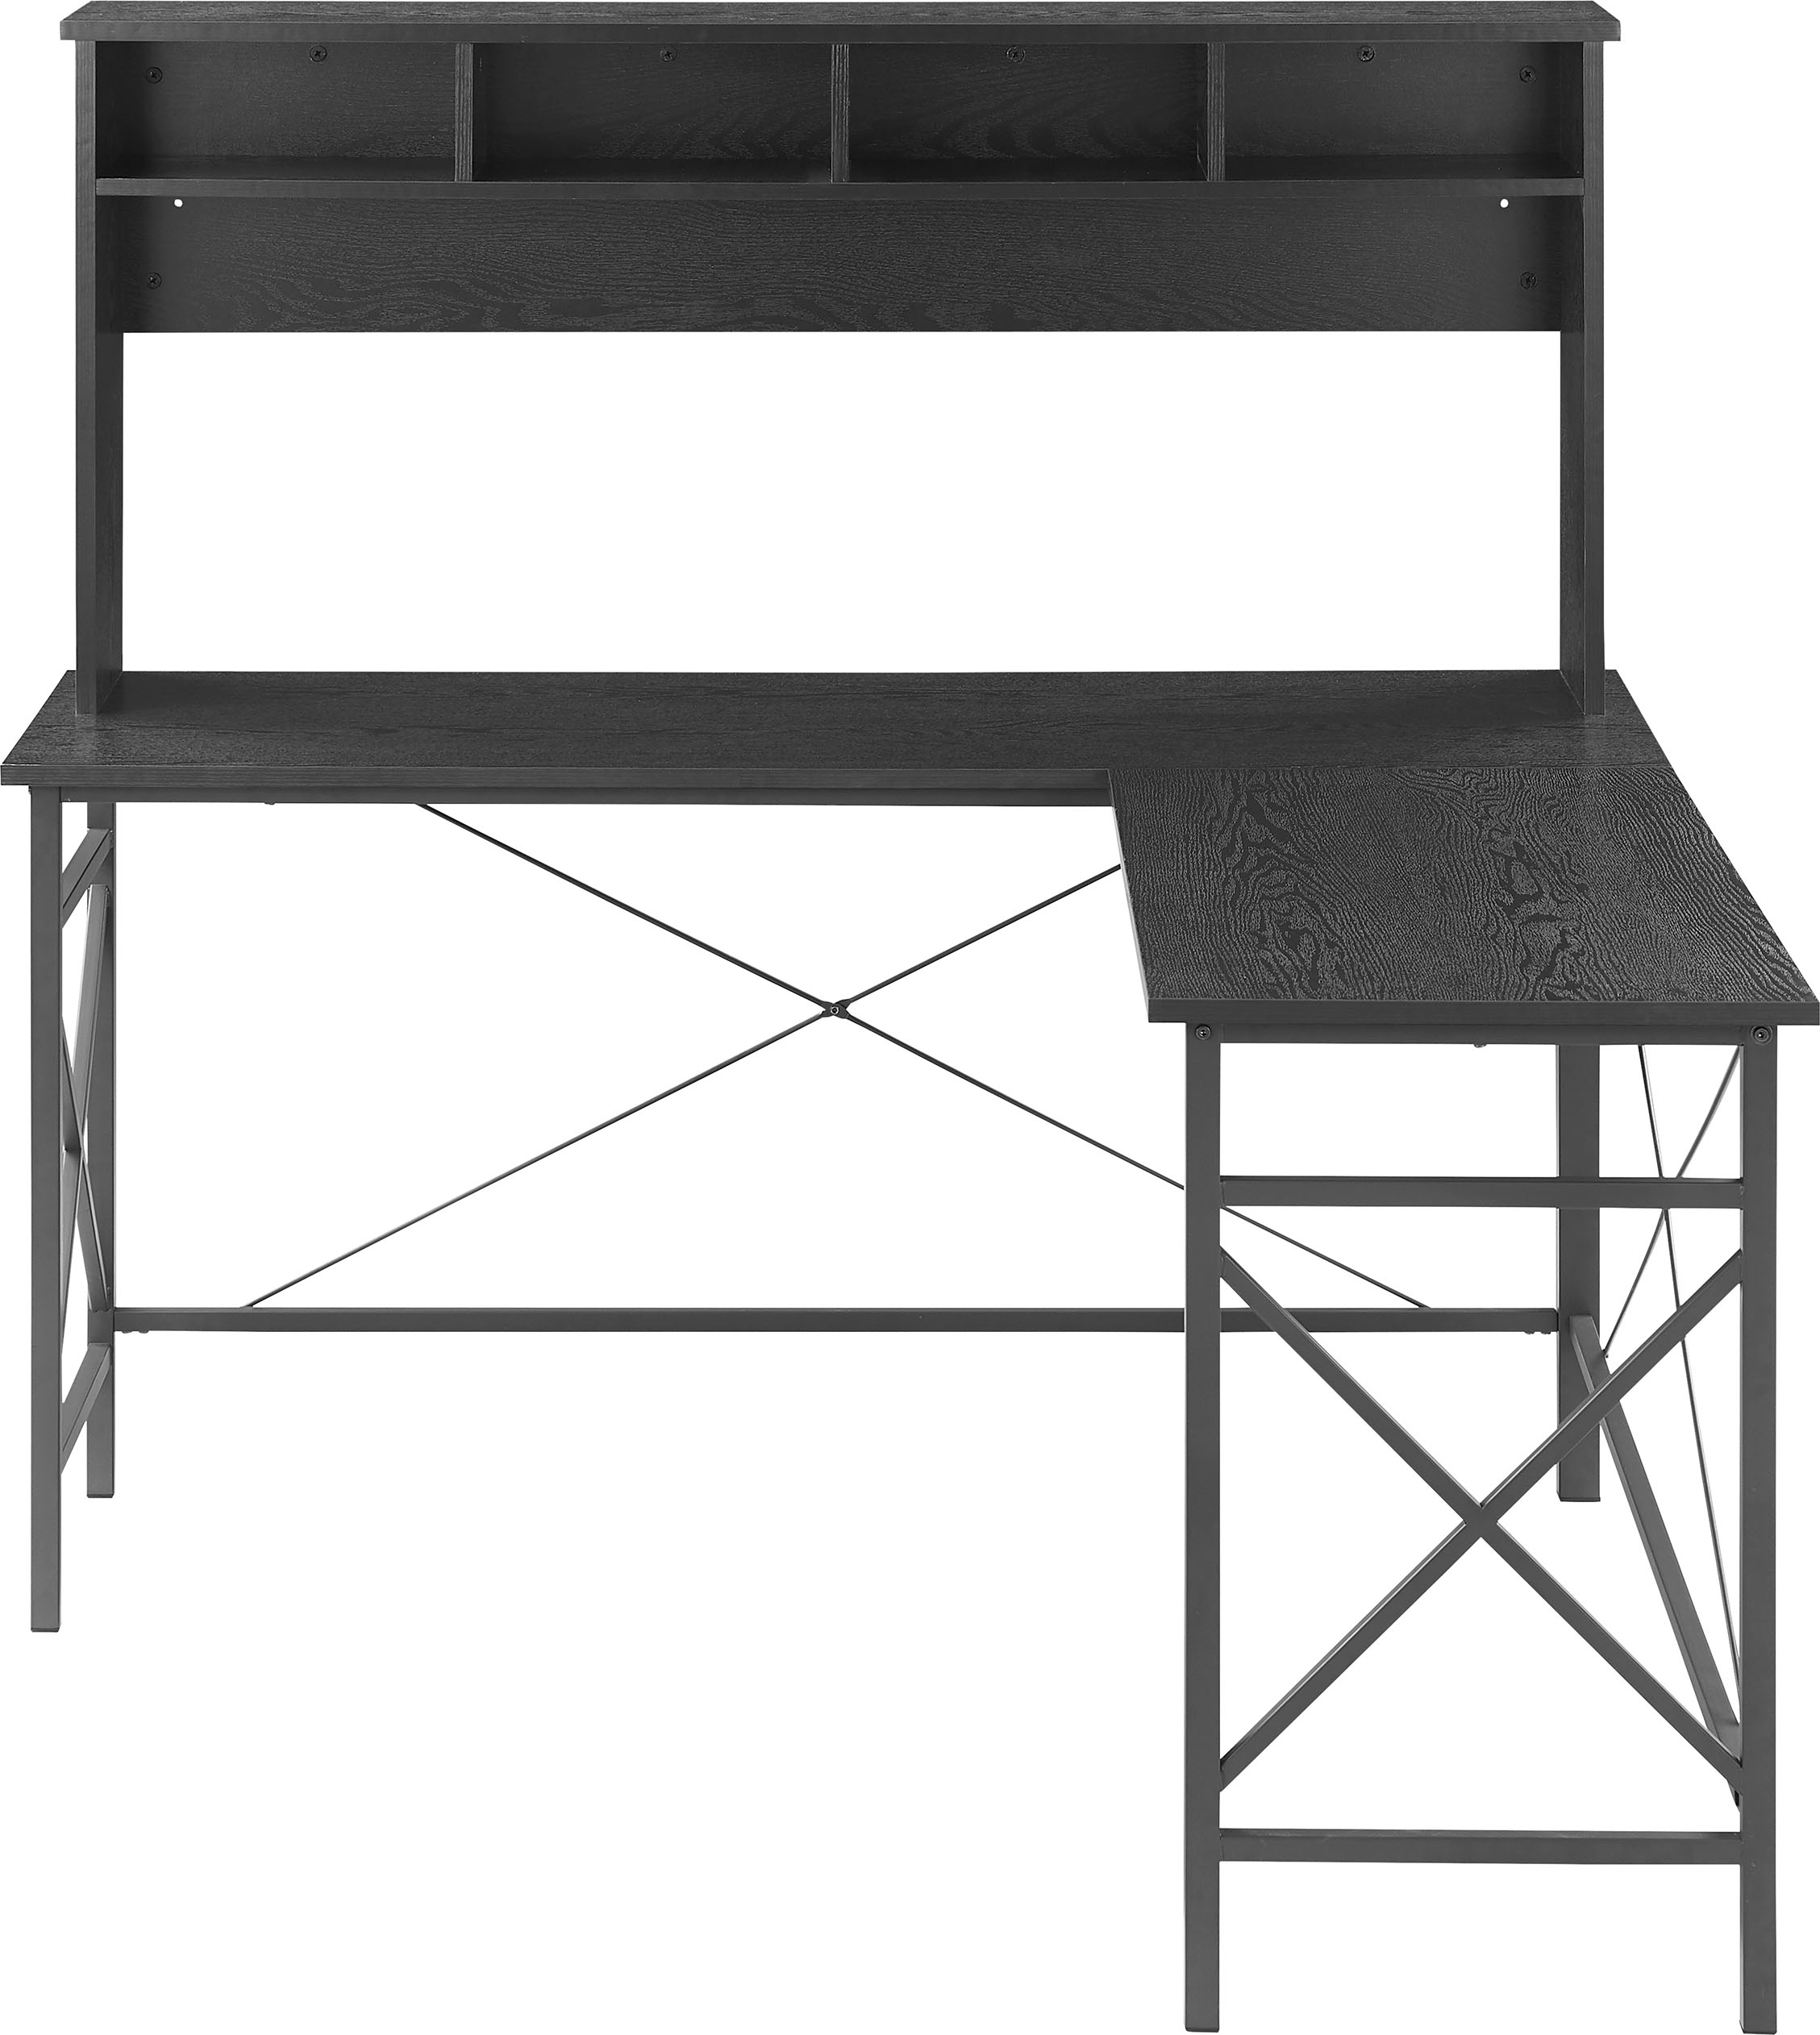 Insignia L-Shaped Computer Desk with Hutch (Black) $149.99 + Free Shipping